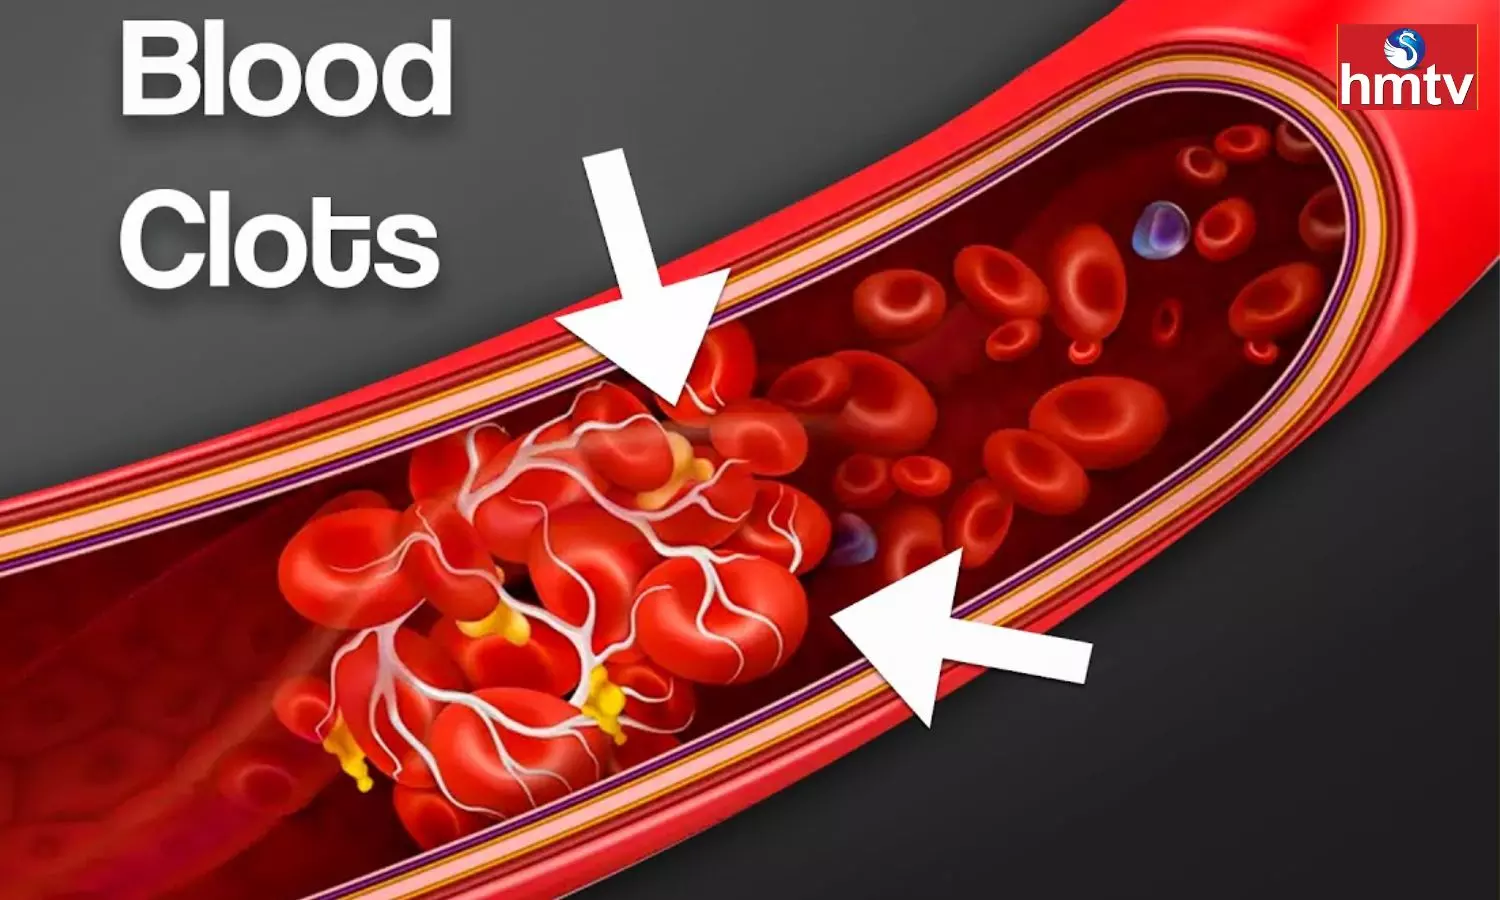 The Problem Of Blood Clots Is More In Winter If These Symptoms Appear Consult A Doctor